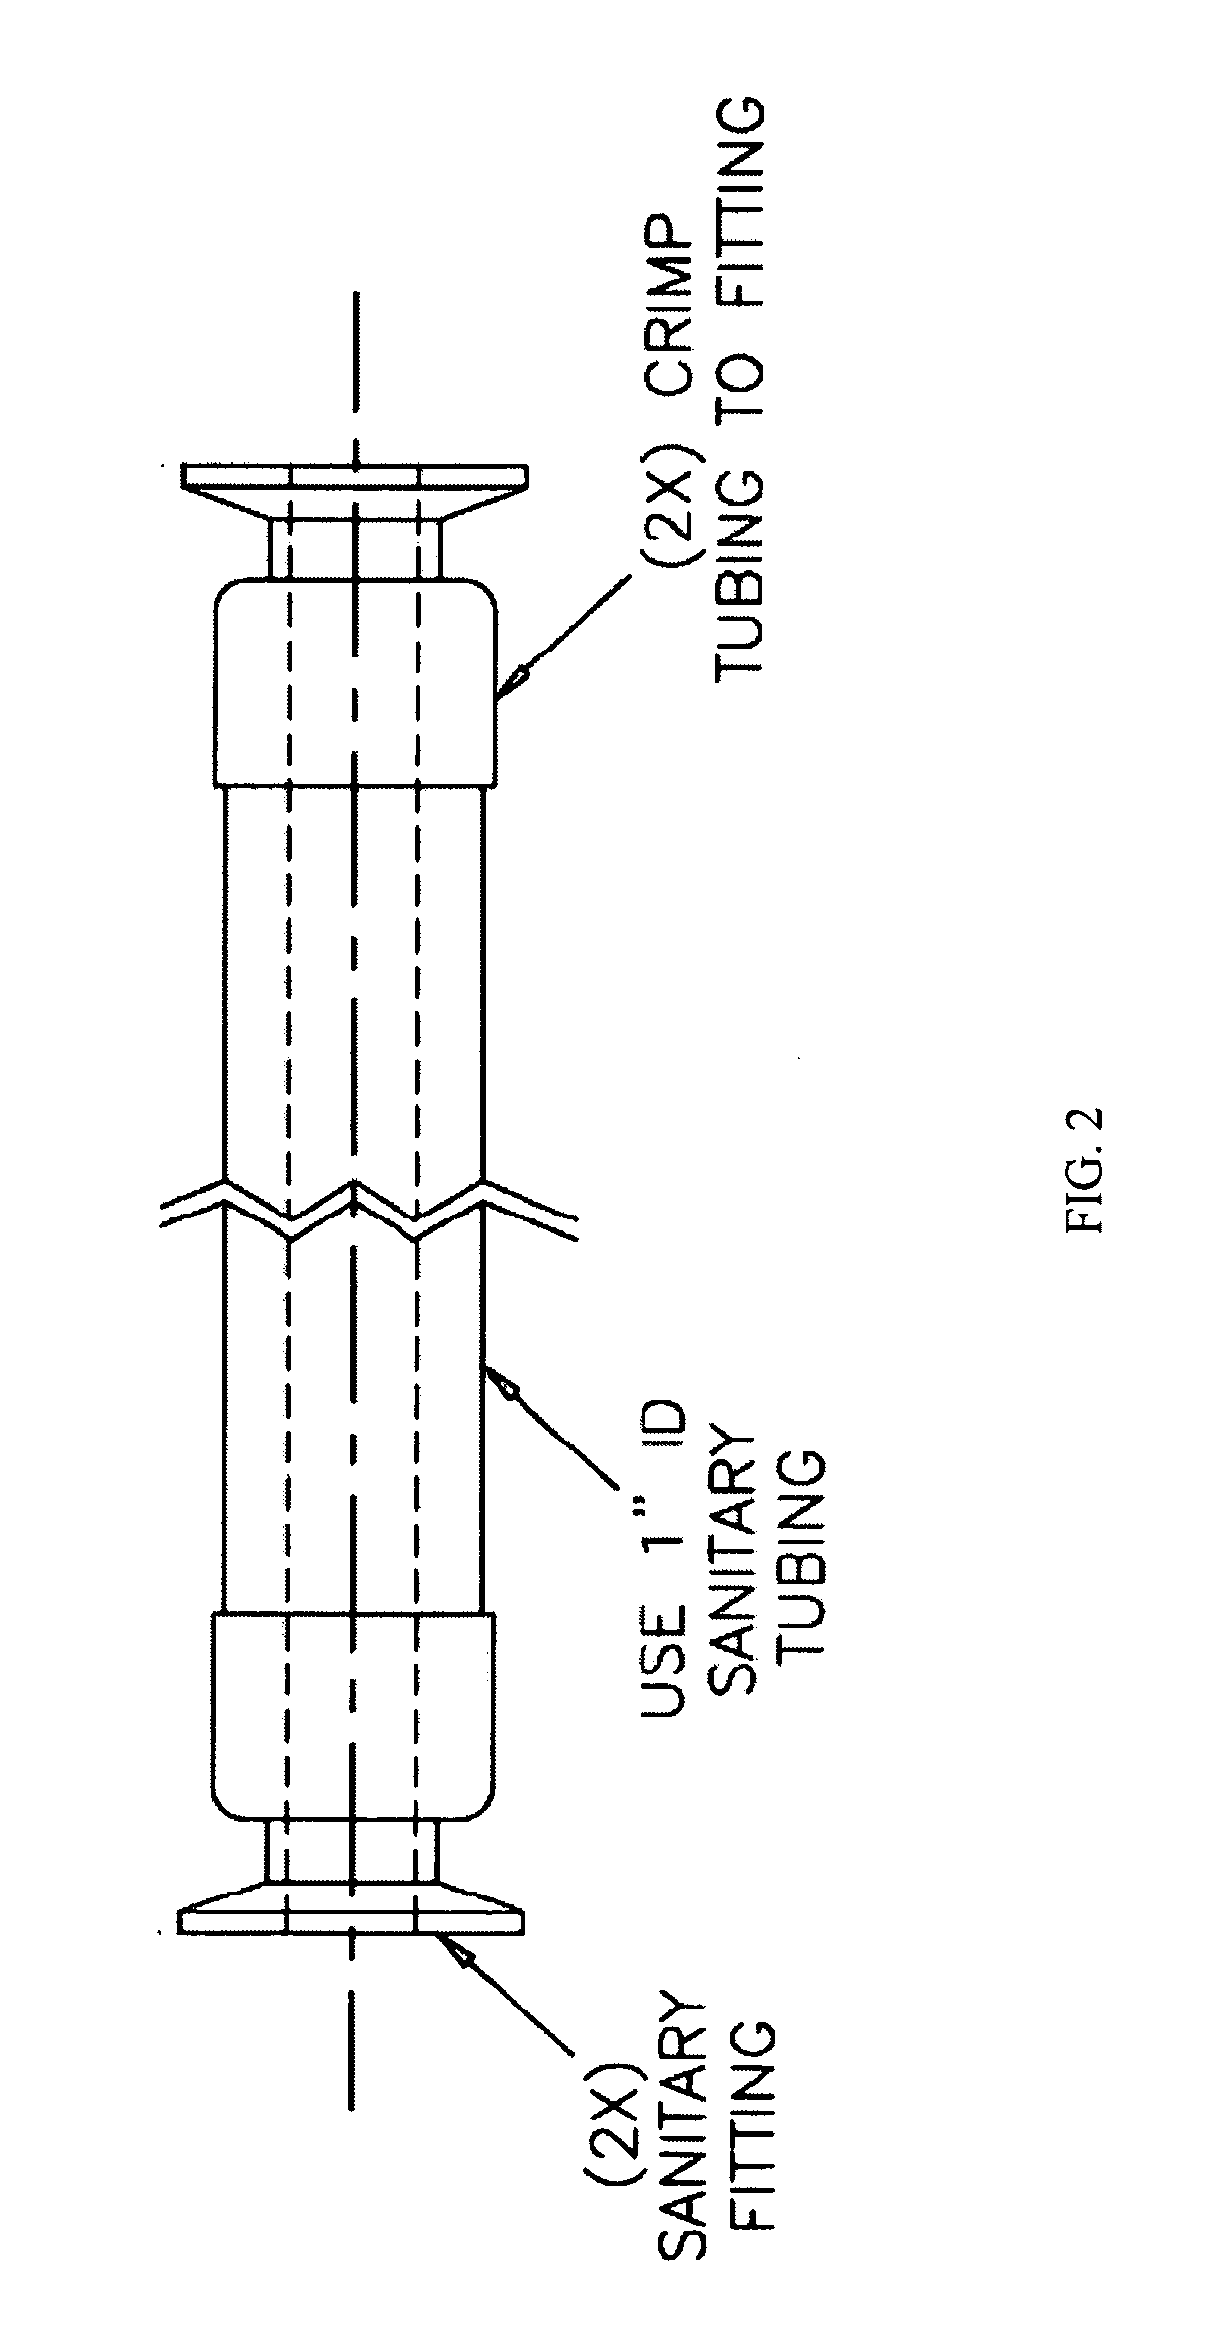 System and Method for Pasteurizing Milk